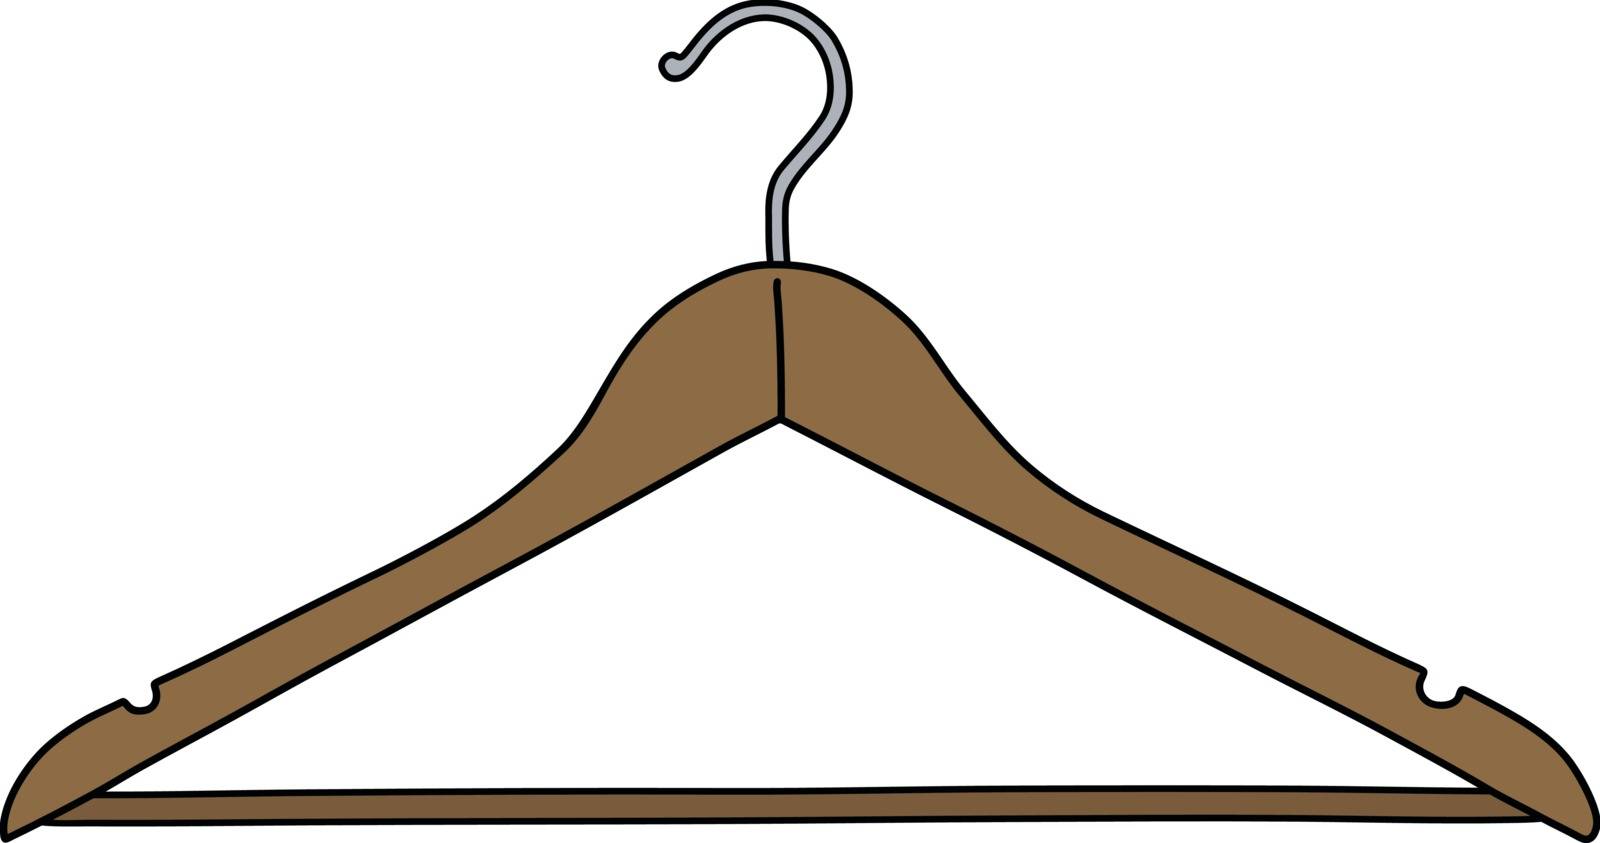 The classic wooden hanger by vostal